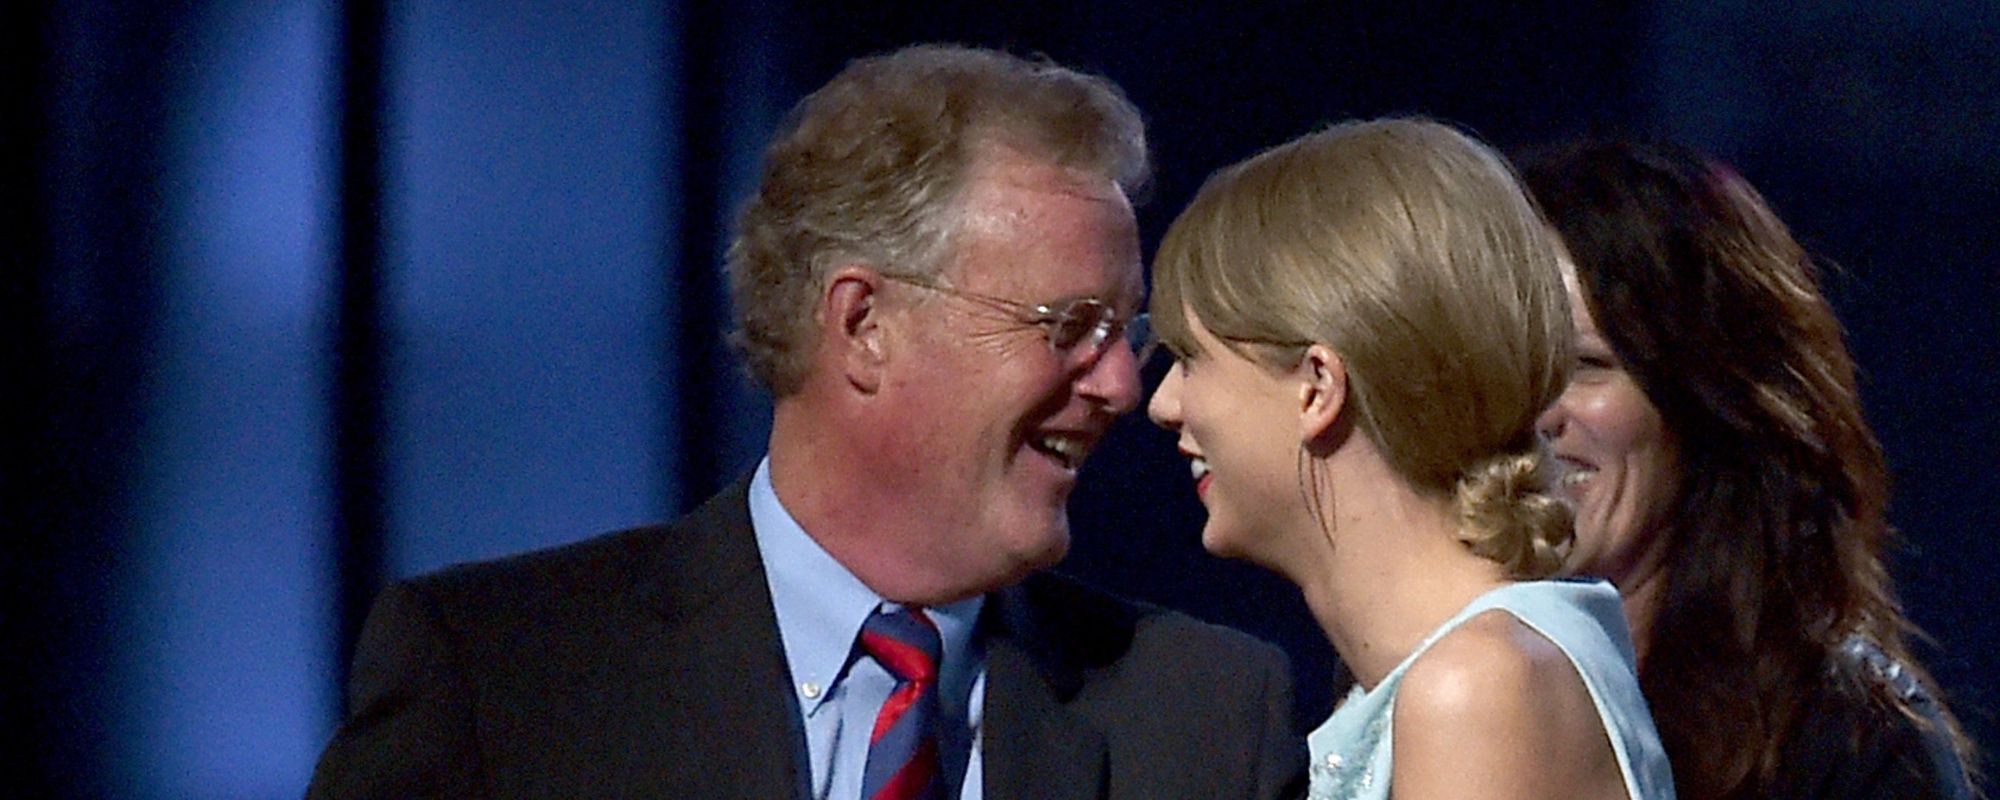 Taylor Swift’s Team Breaks Silence on Assault Accusations Against Her Father